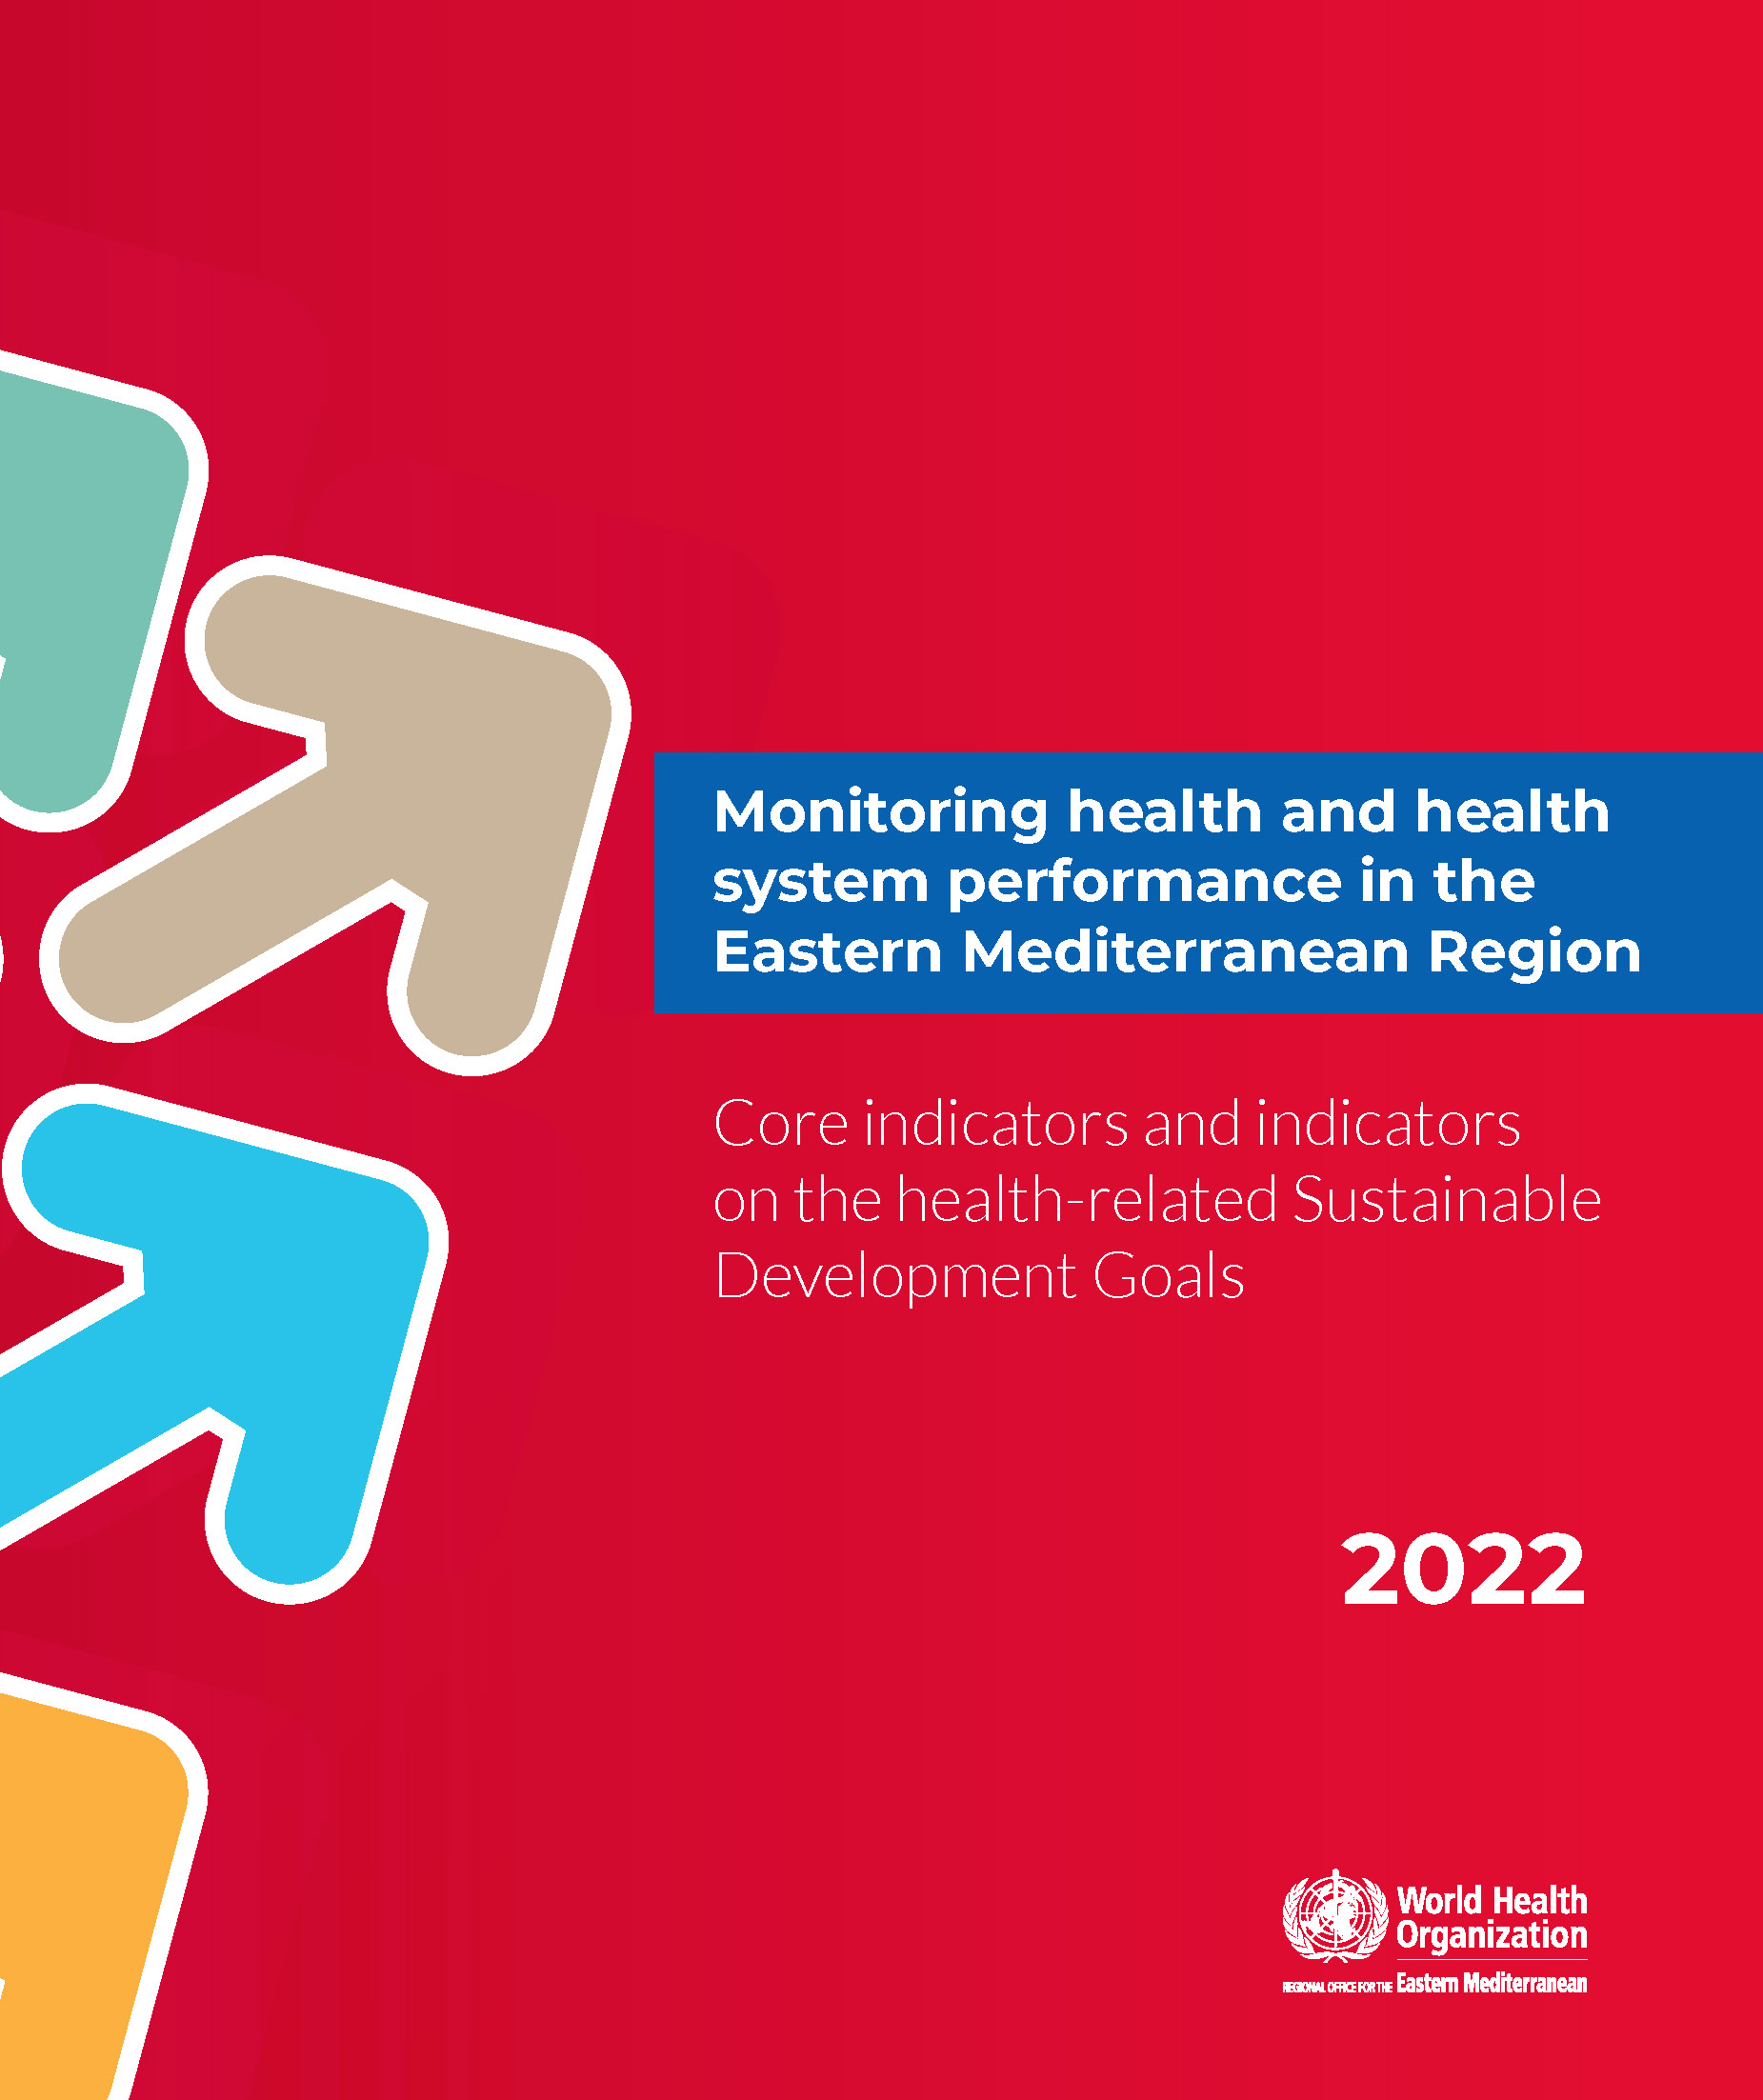 Monitoring health and health system performance in the Eastern Mediterranean Region: core indicators and indicators on the health-related Sustainable Development Goals 2022